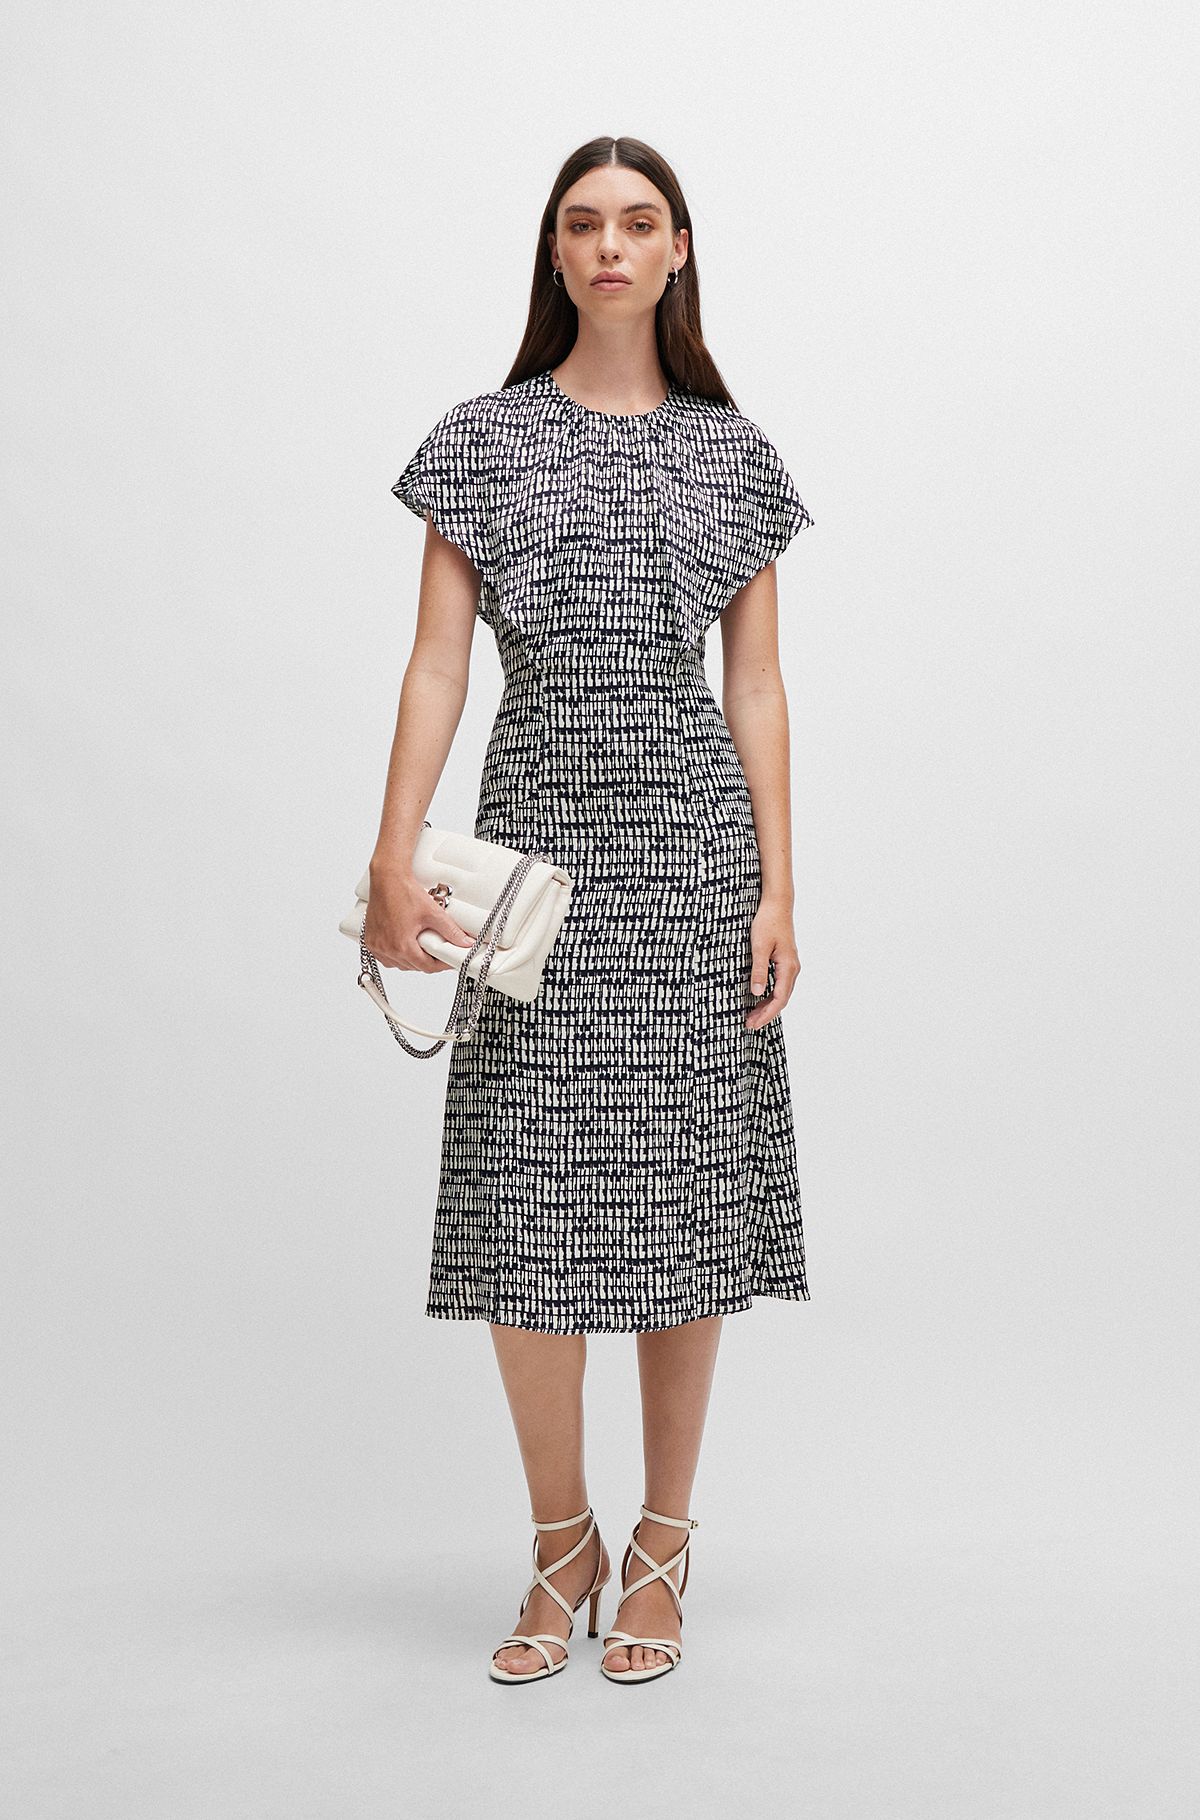 Short-sleeved dress in abstract-patterned fabric, Patterned